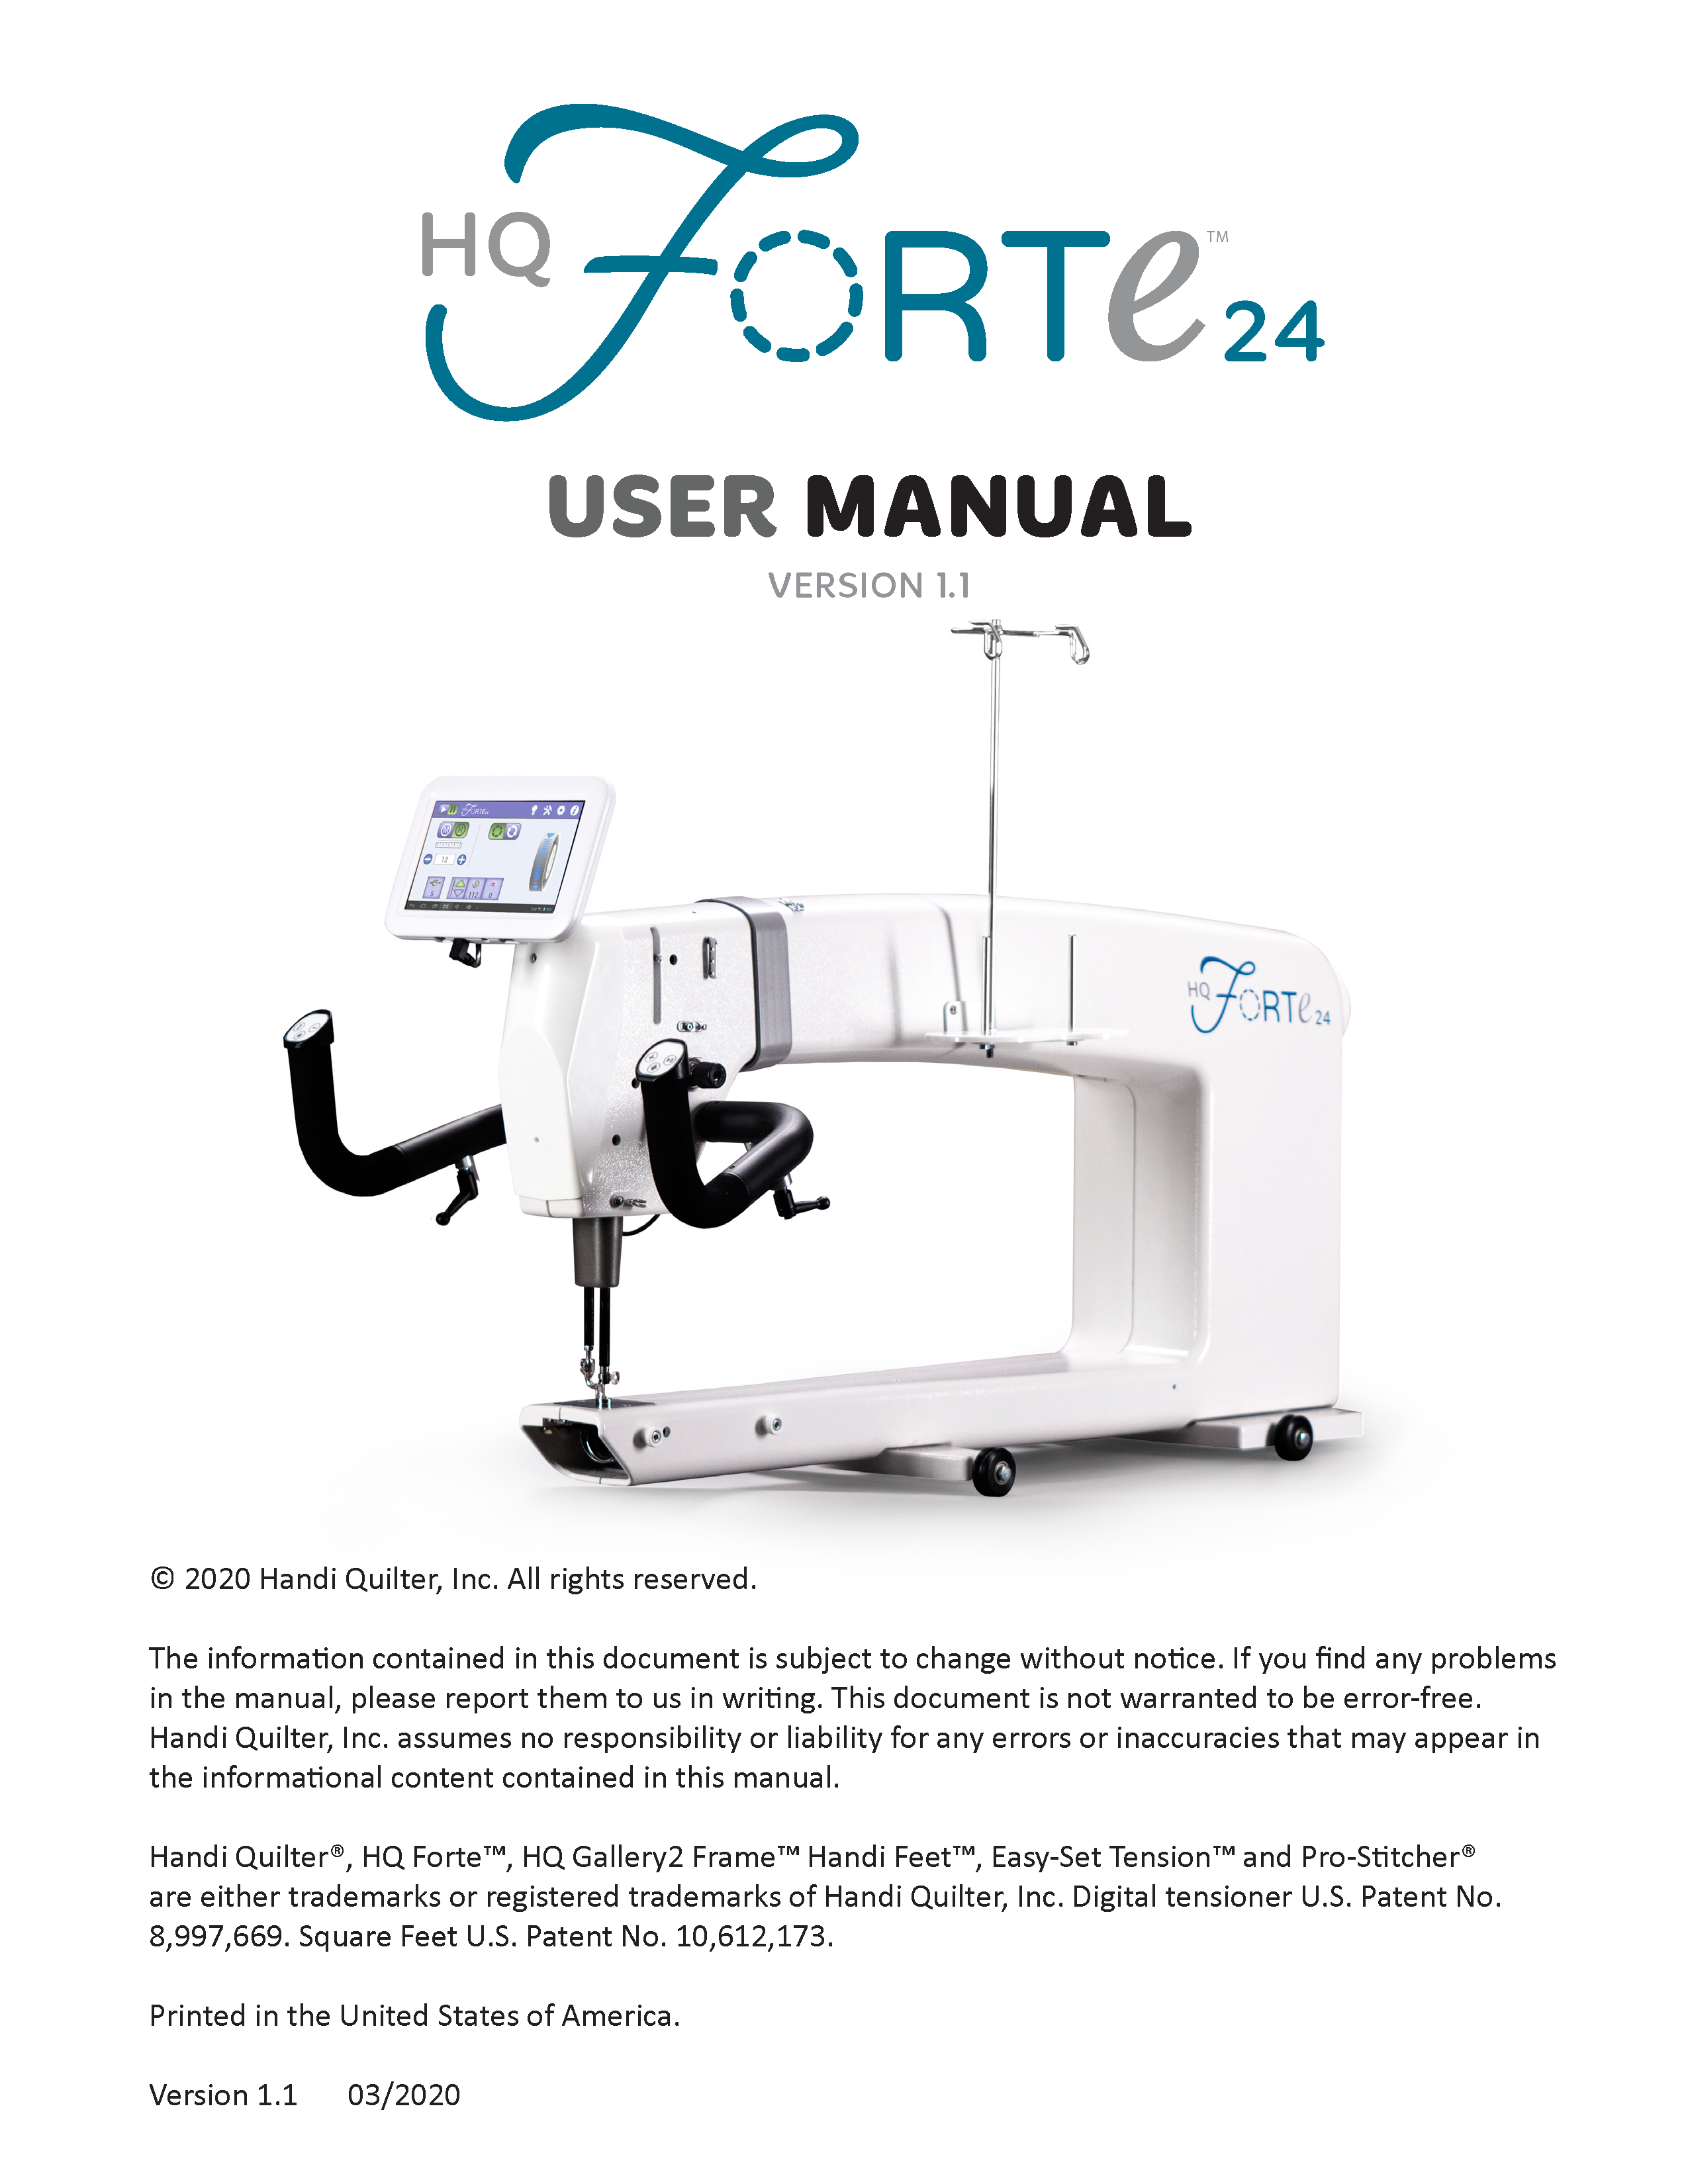 HQ-Forte-User-Manual-ALL-2_Page_02.png